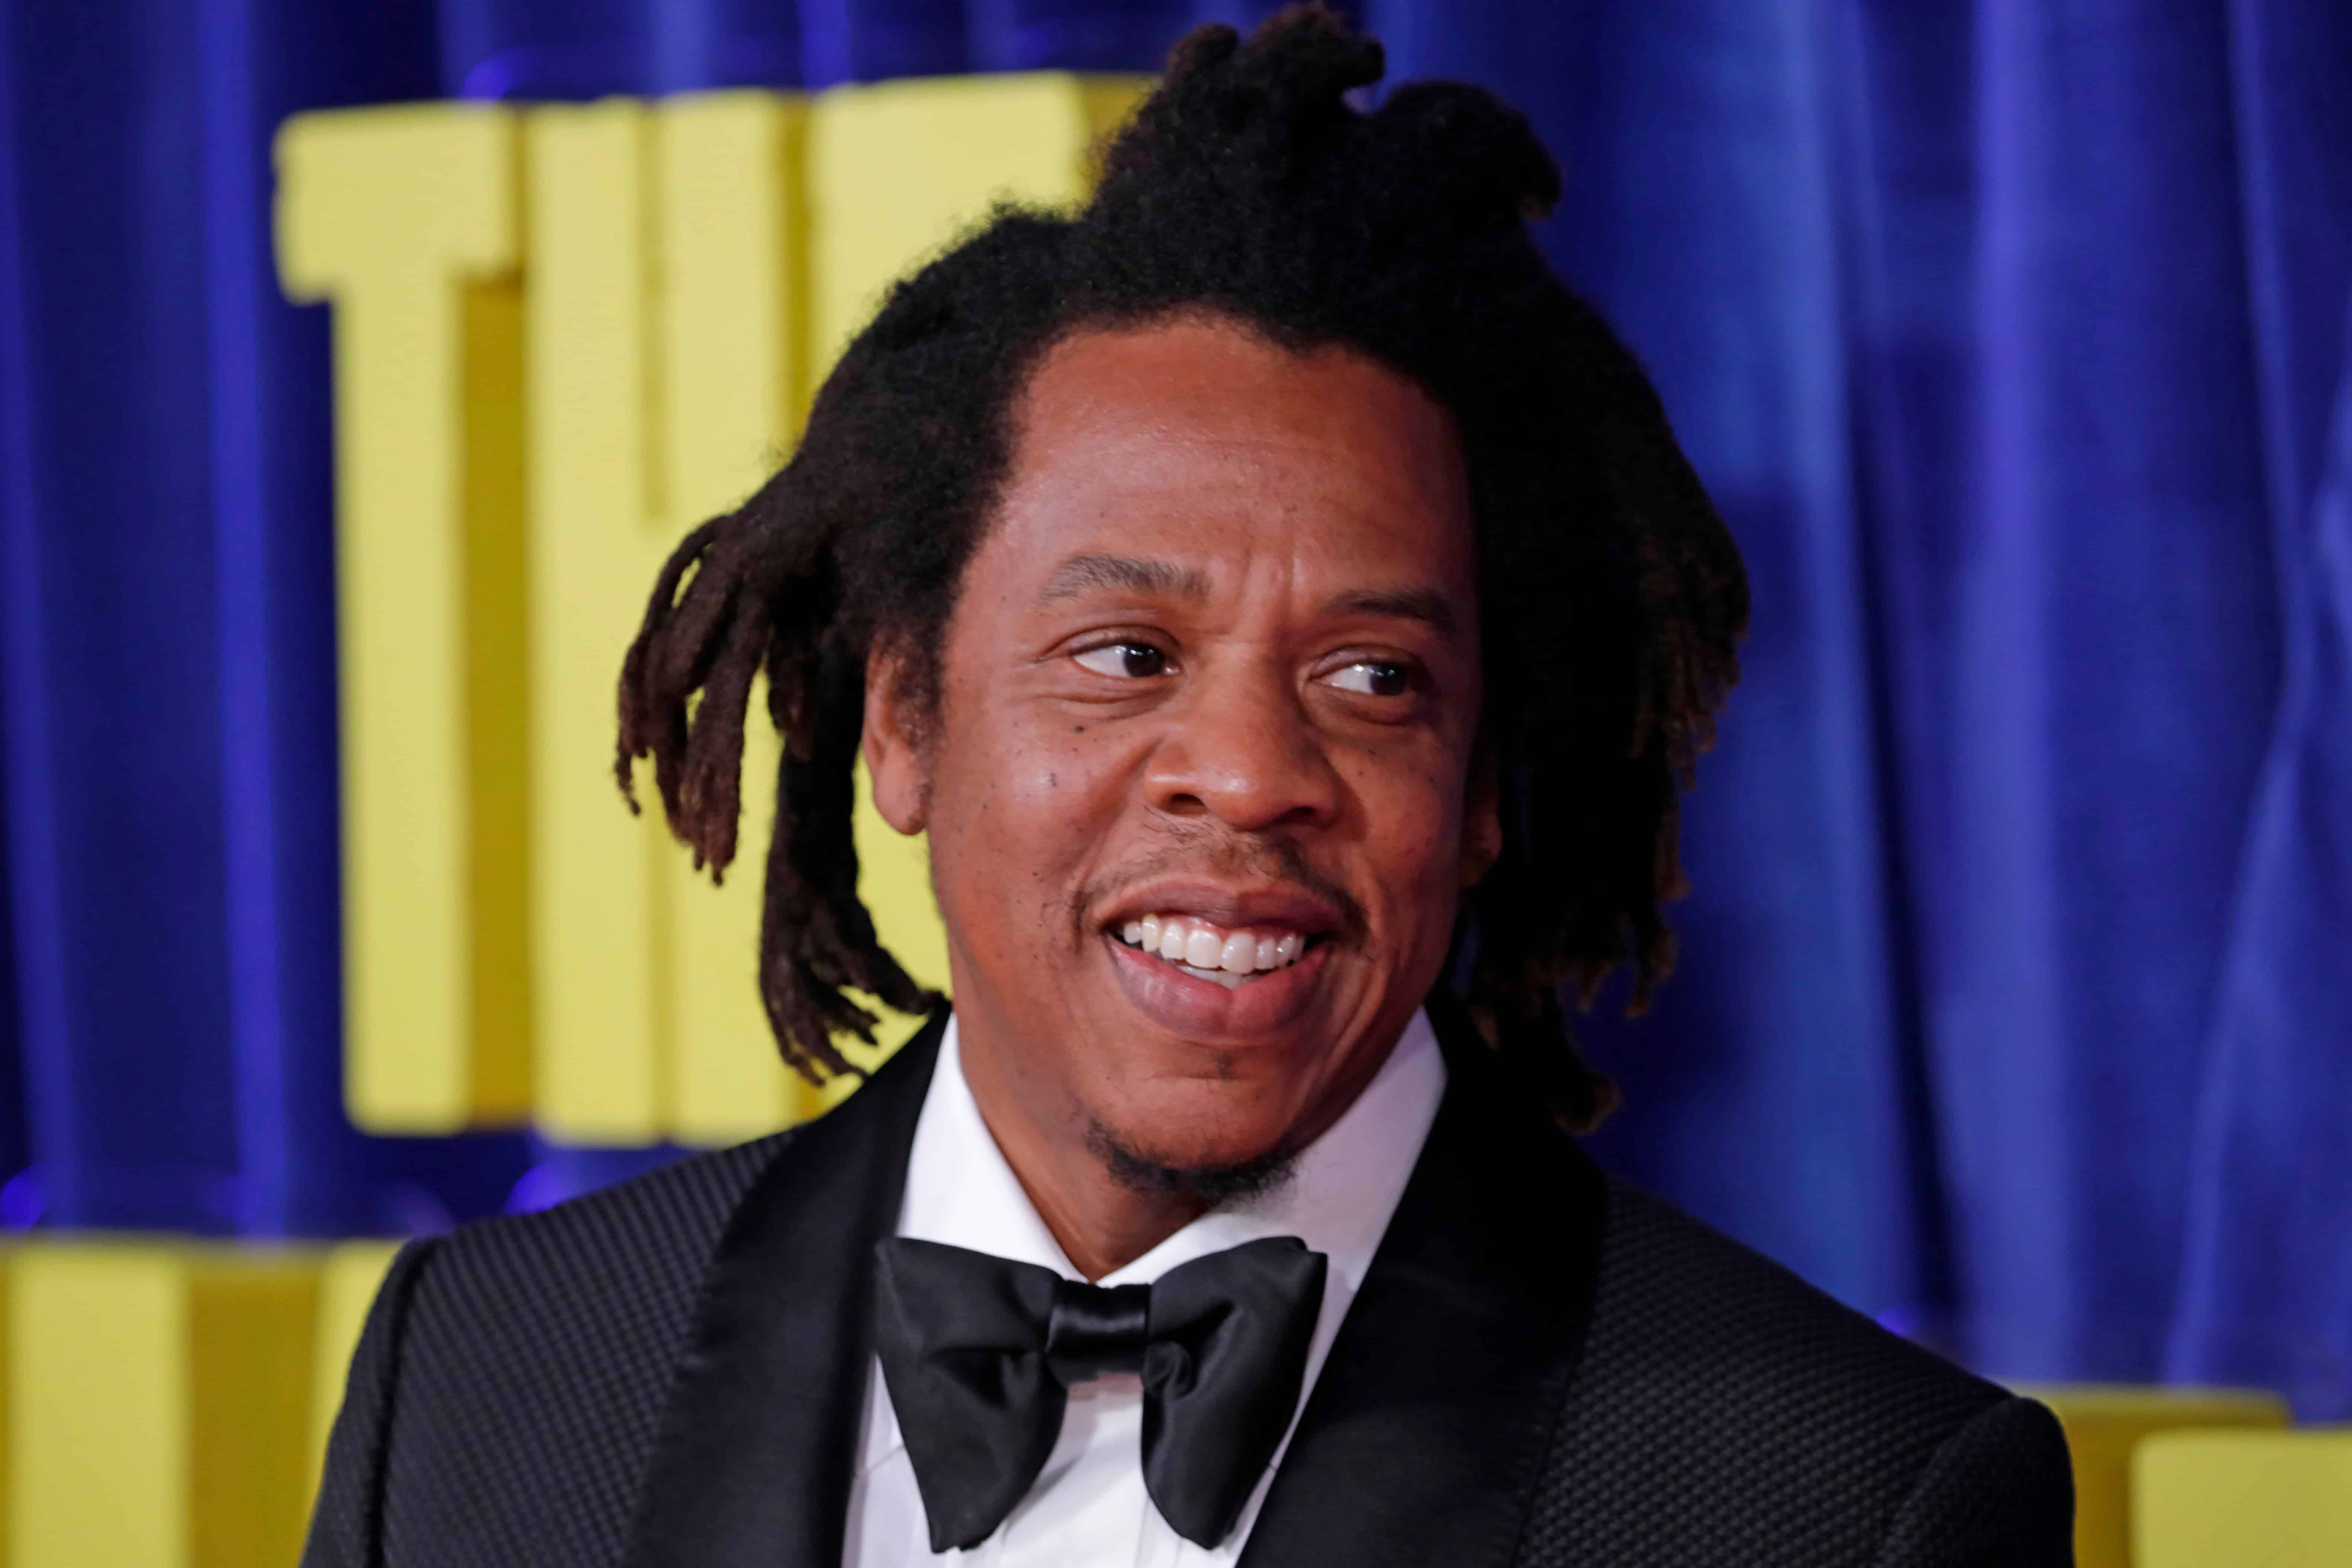 Jay-Z tried to calm down an upset Denzel Washington during